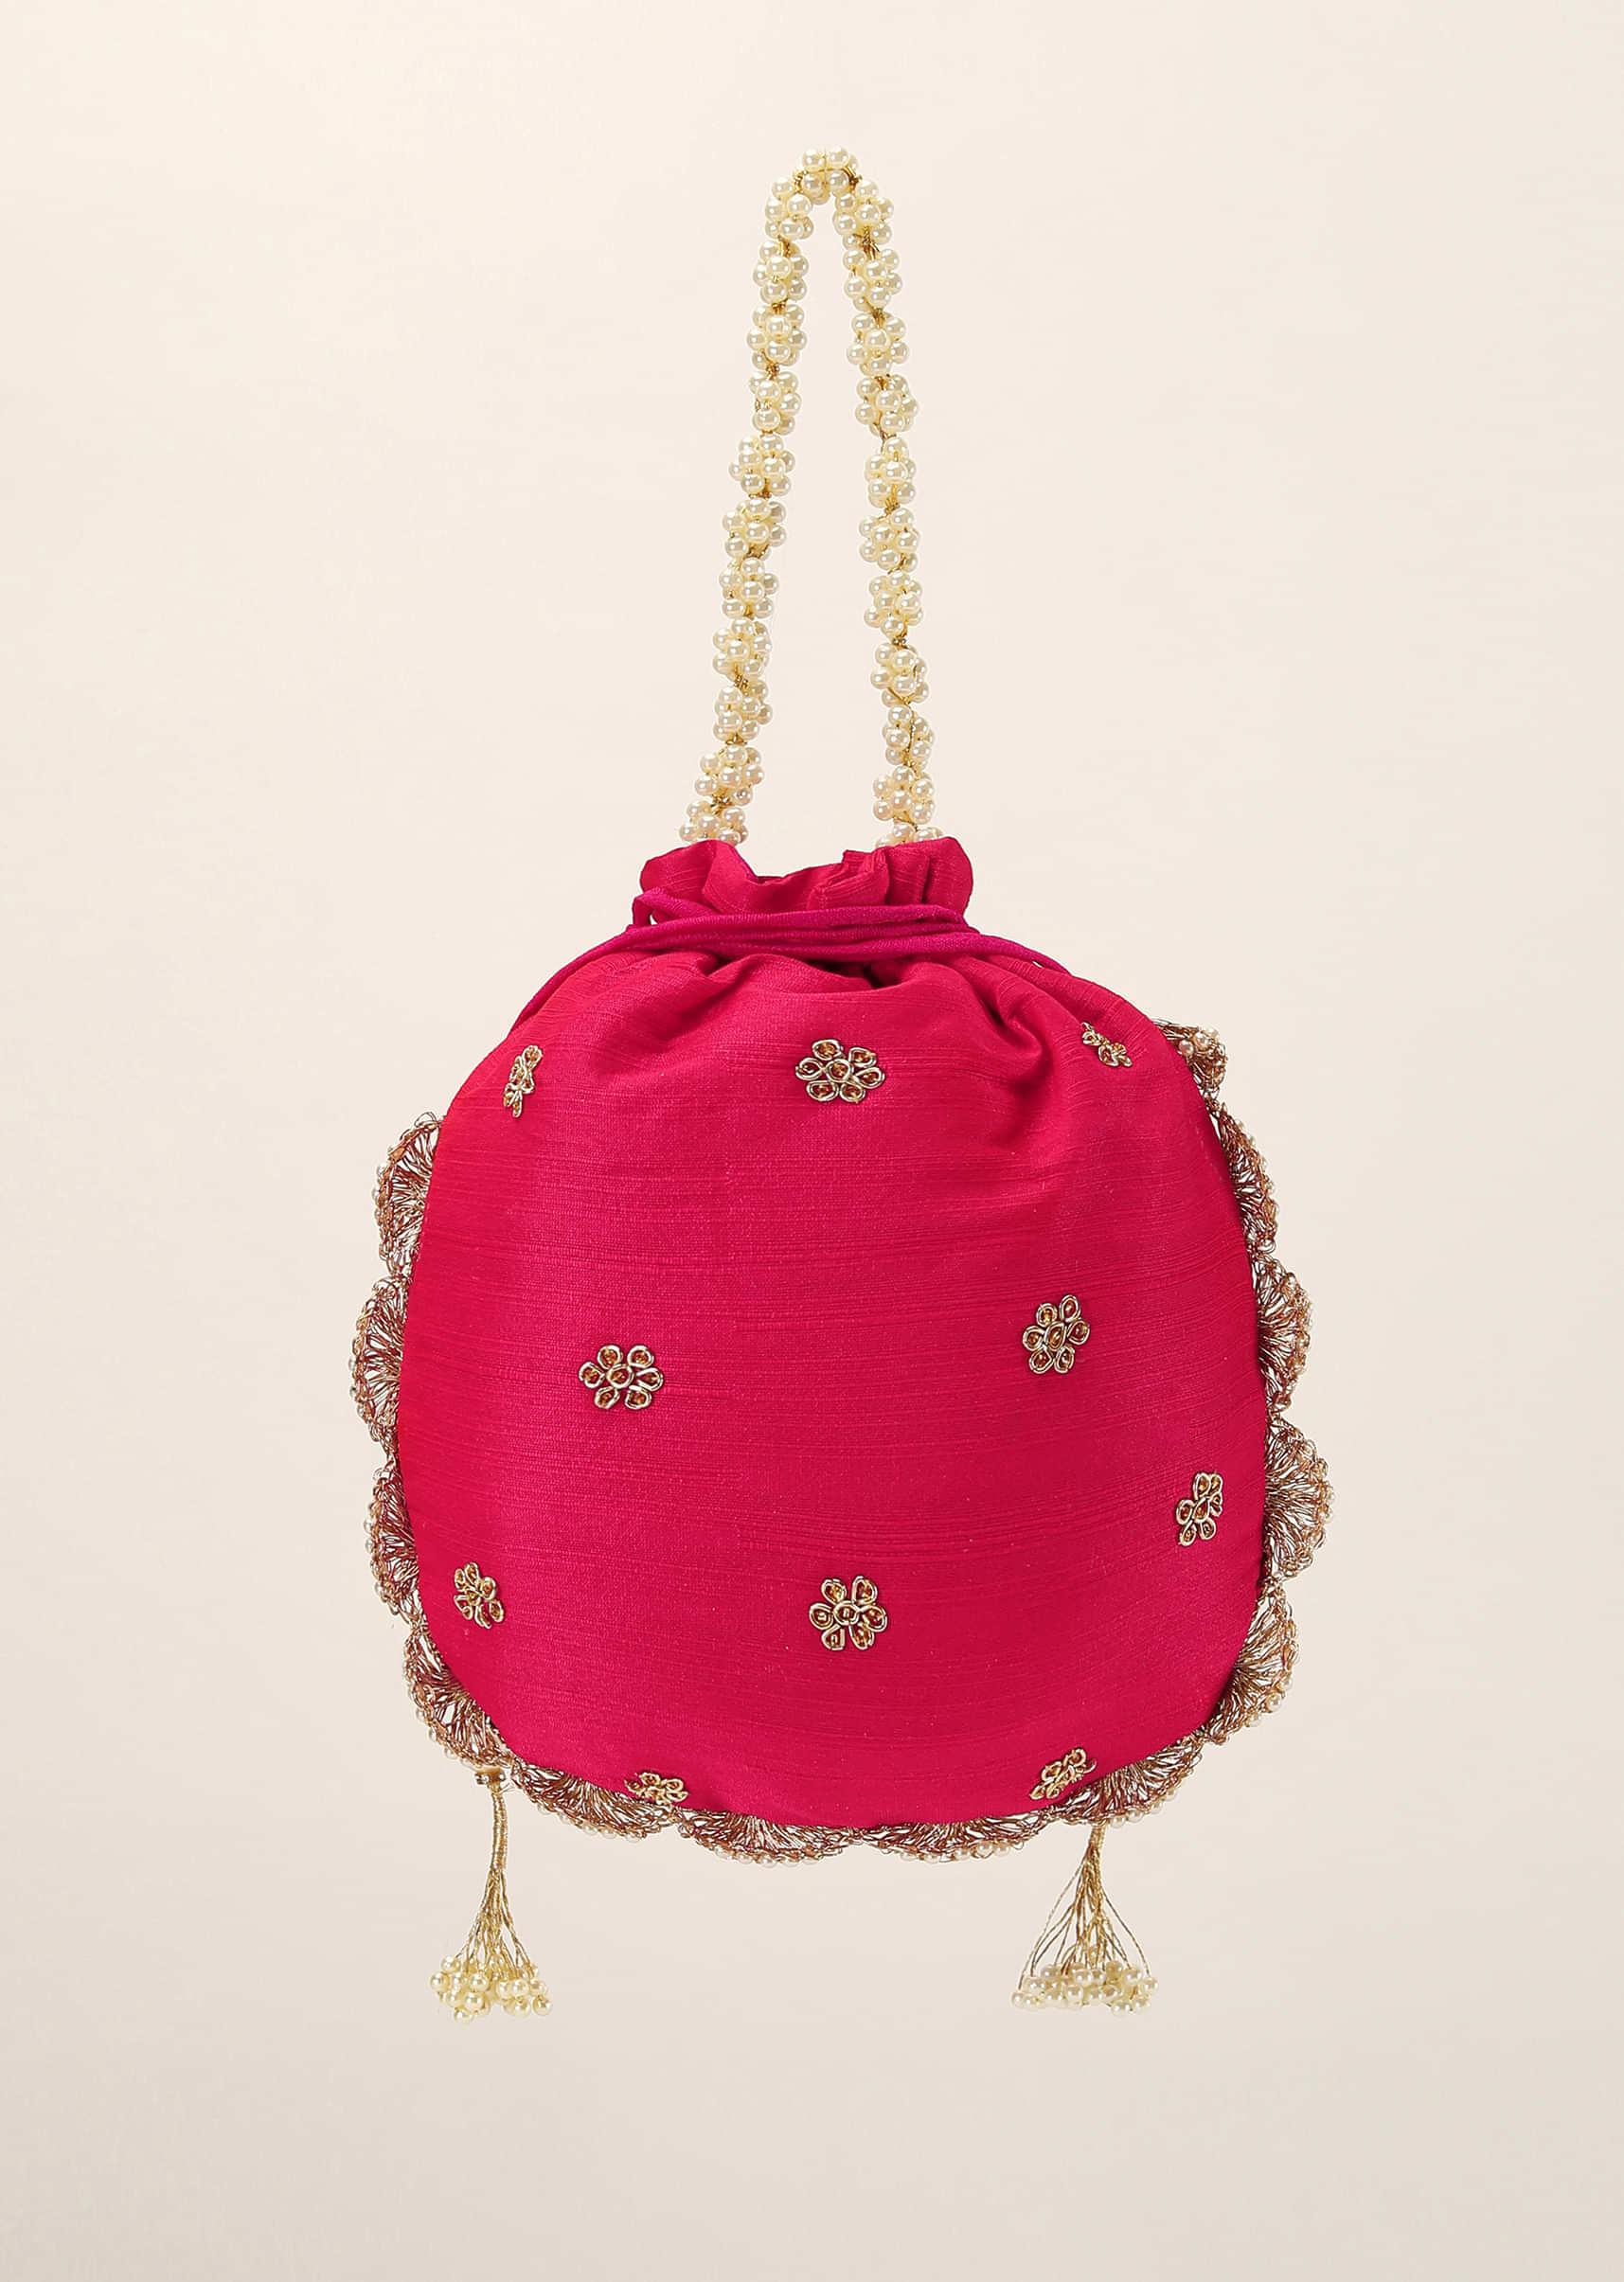 Rani Pink Potli In Raw Silk With Hand Embroidery Detailing Using Zardosi Work In Floral Design All Over